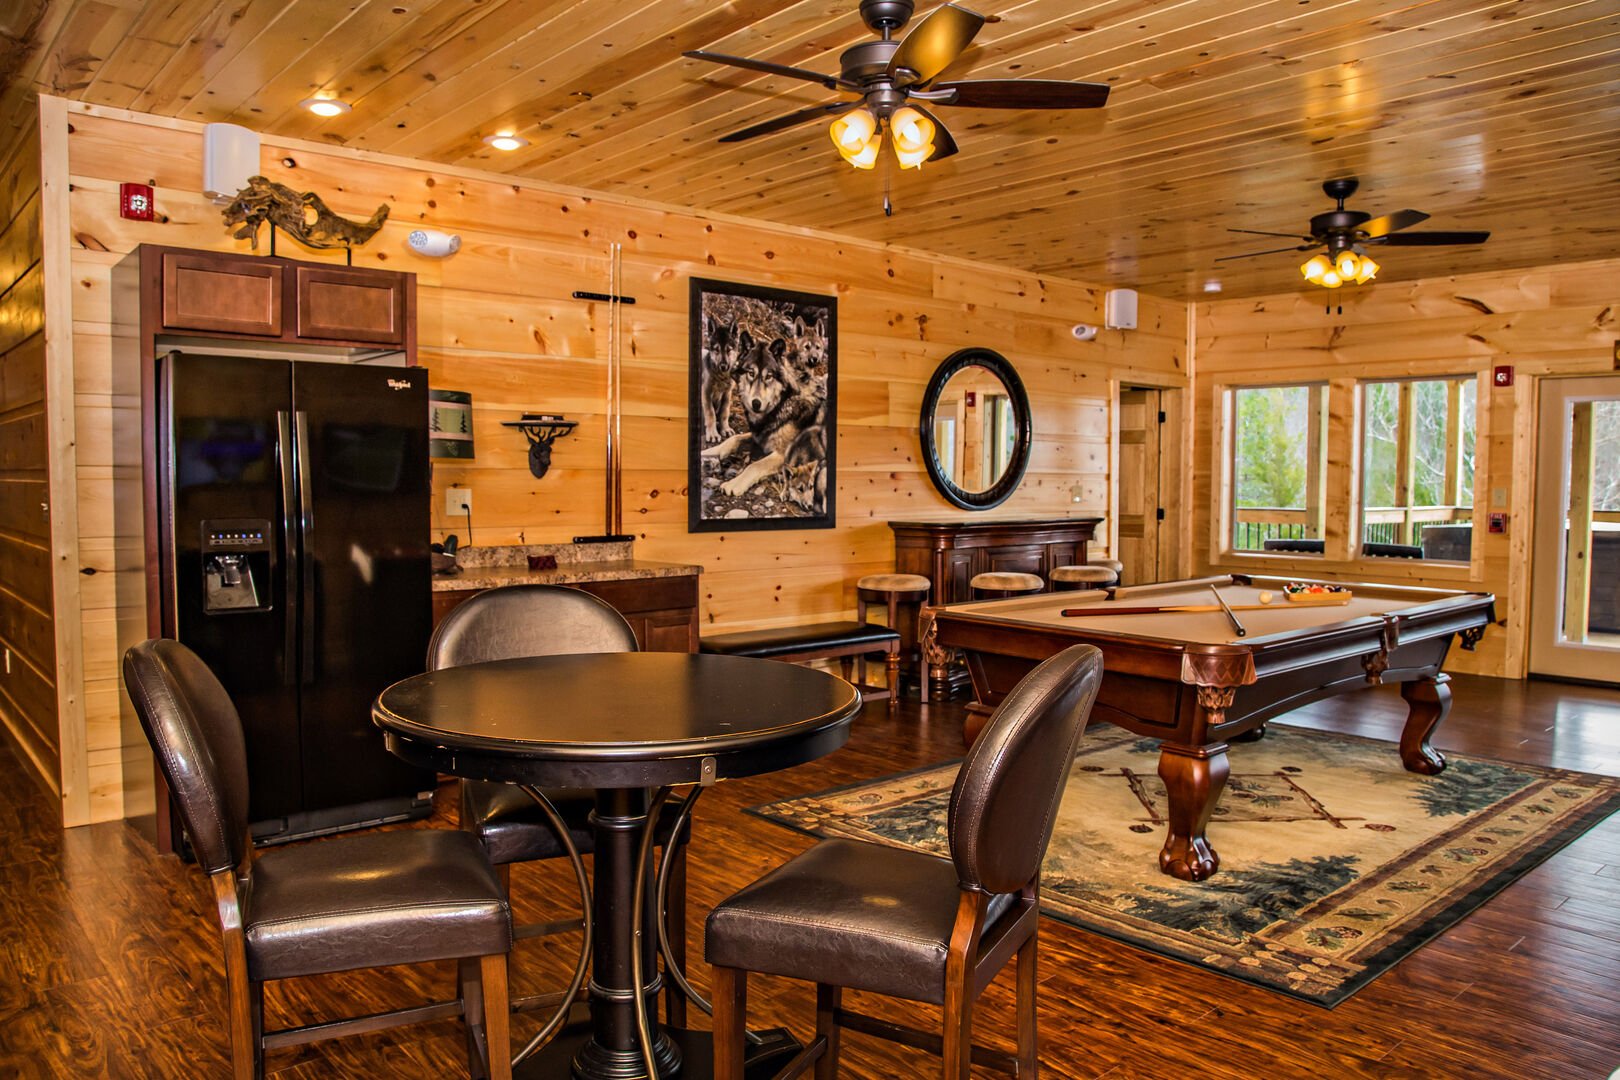 Game Room with Refrigerator, Wet Bar, Pool Table, Table, Chairs, and Stools.